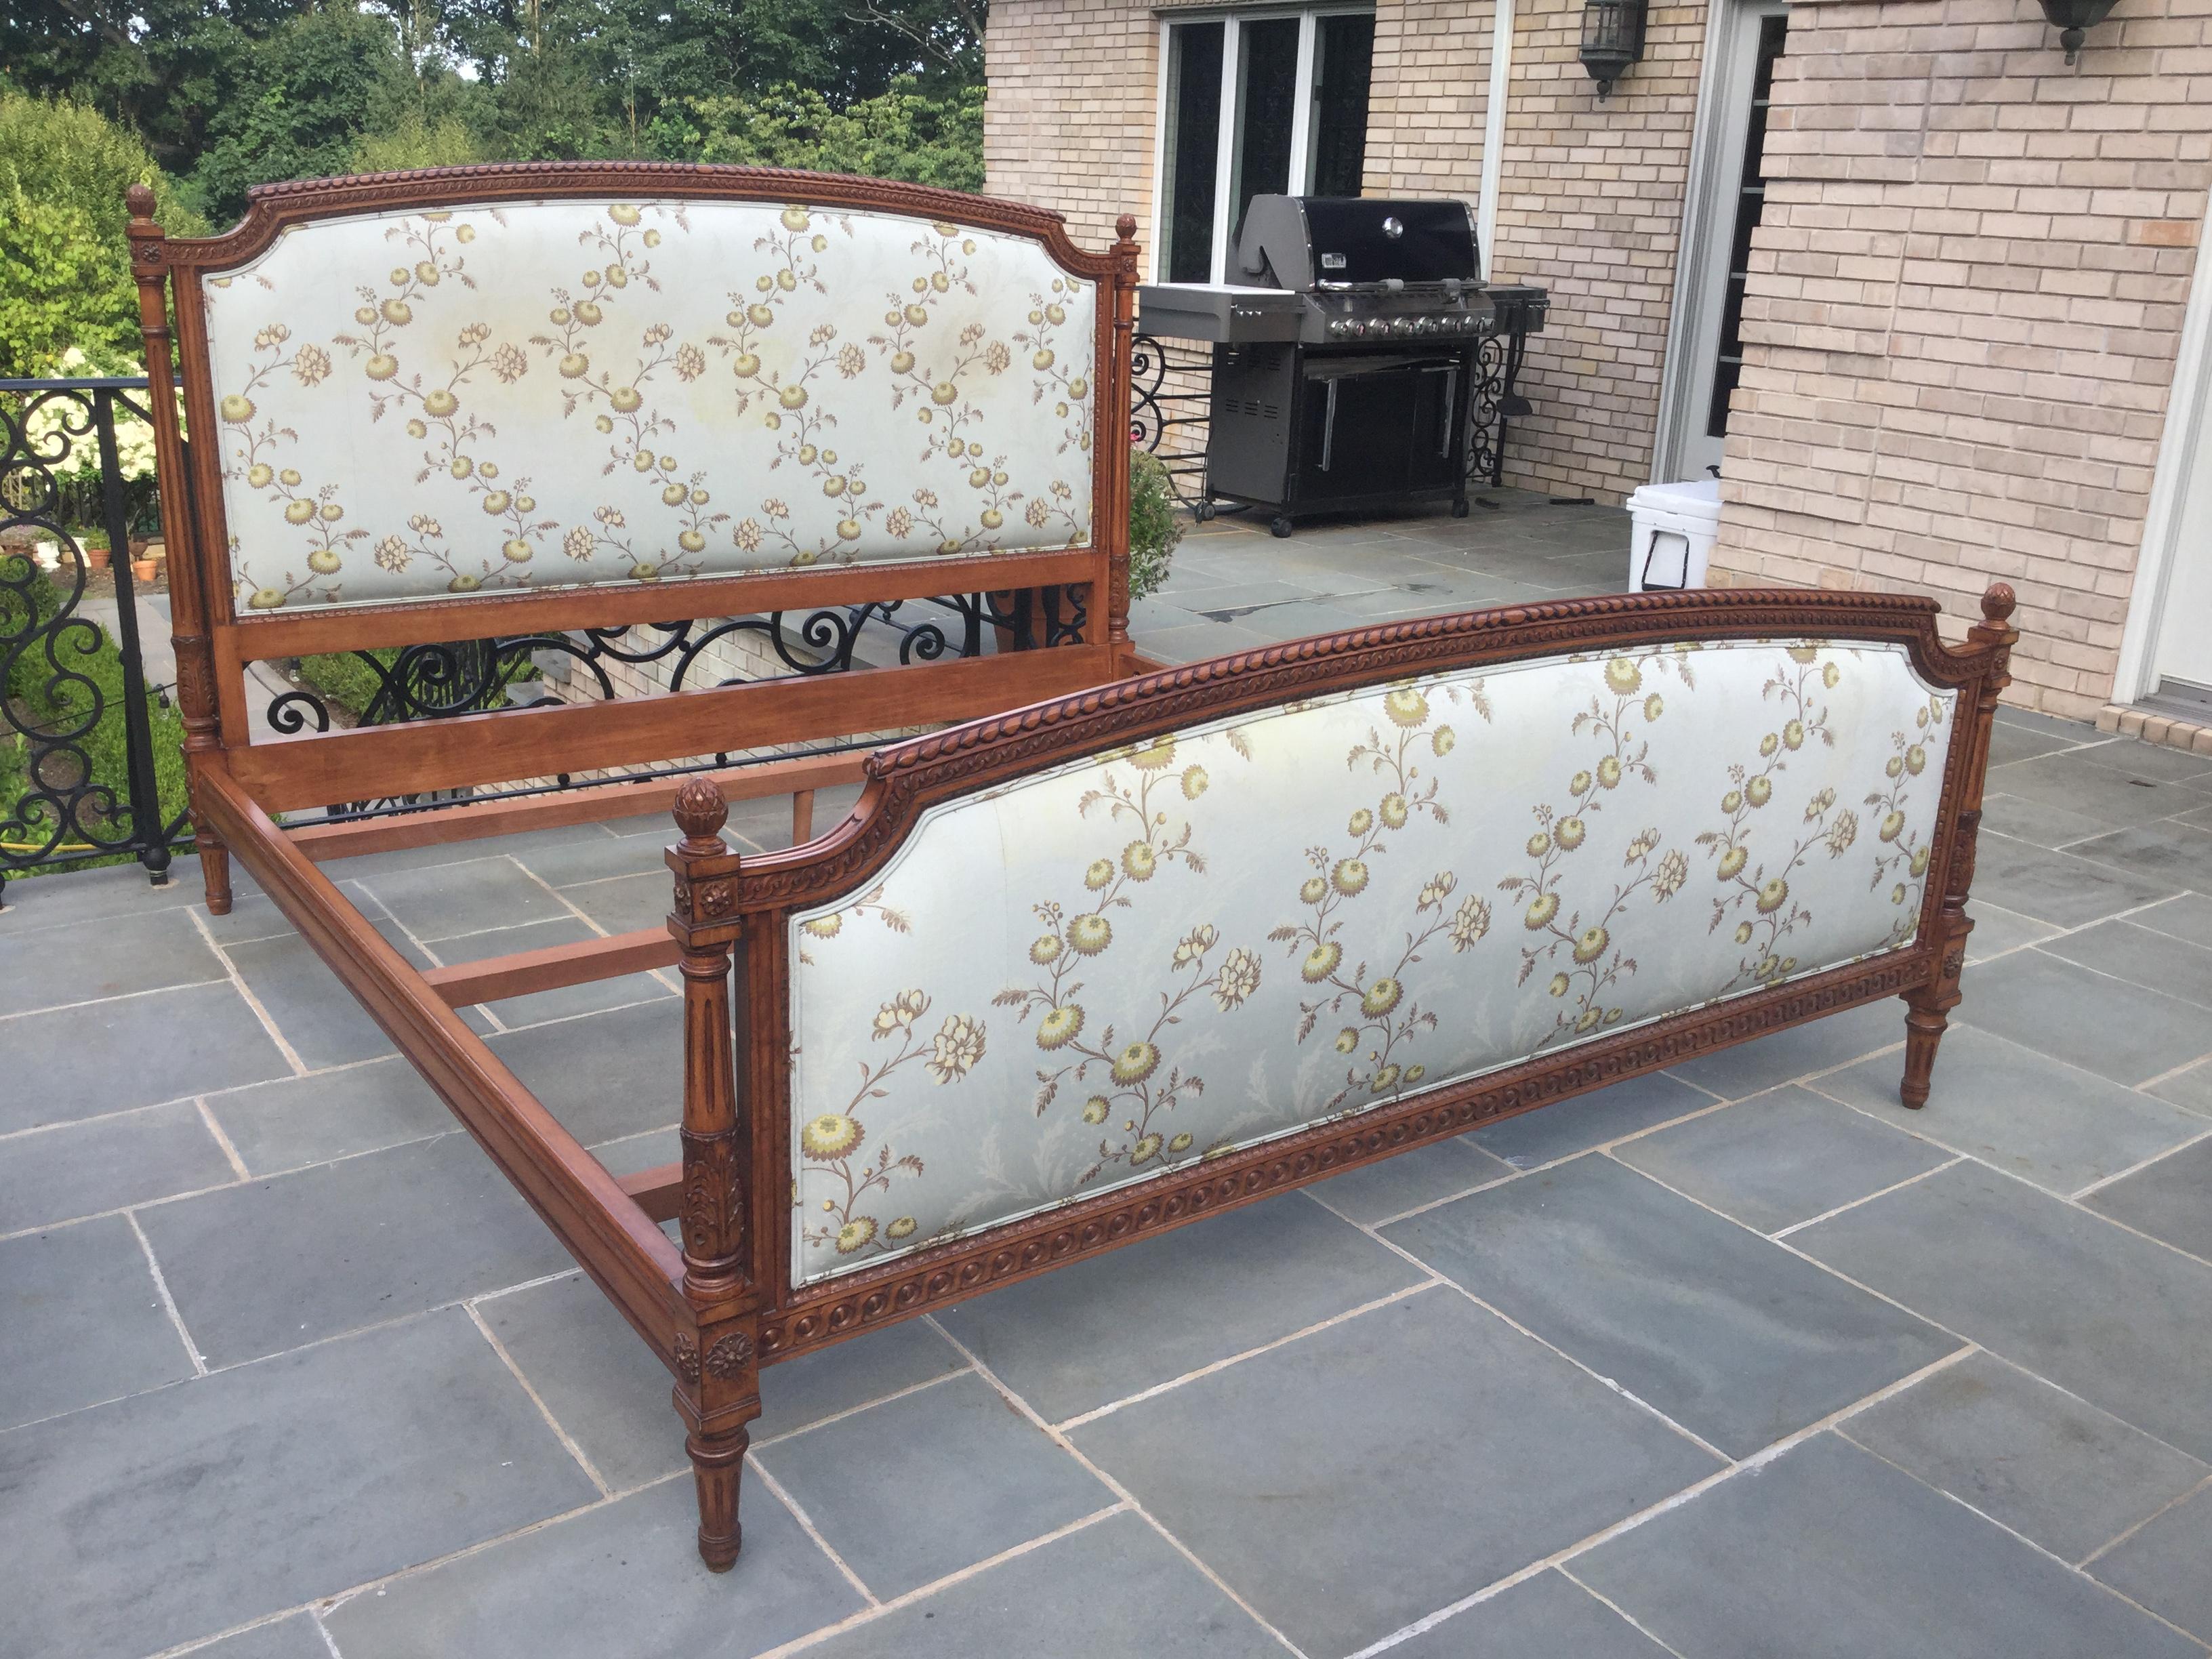 You will love this beautifully carved Louis XVI style King-size bed. This bed features the original Scalamandre upholstery, however there is some yellowing on the fabric. We are selling the bed in its current condition, giving the buyer the option